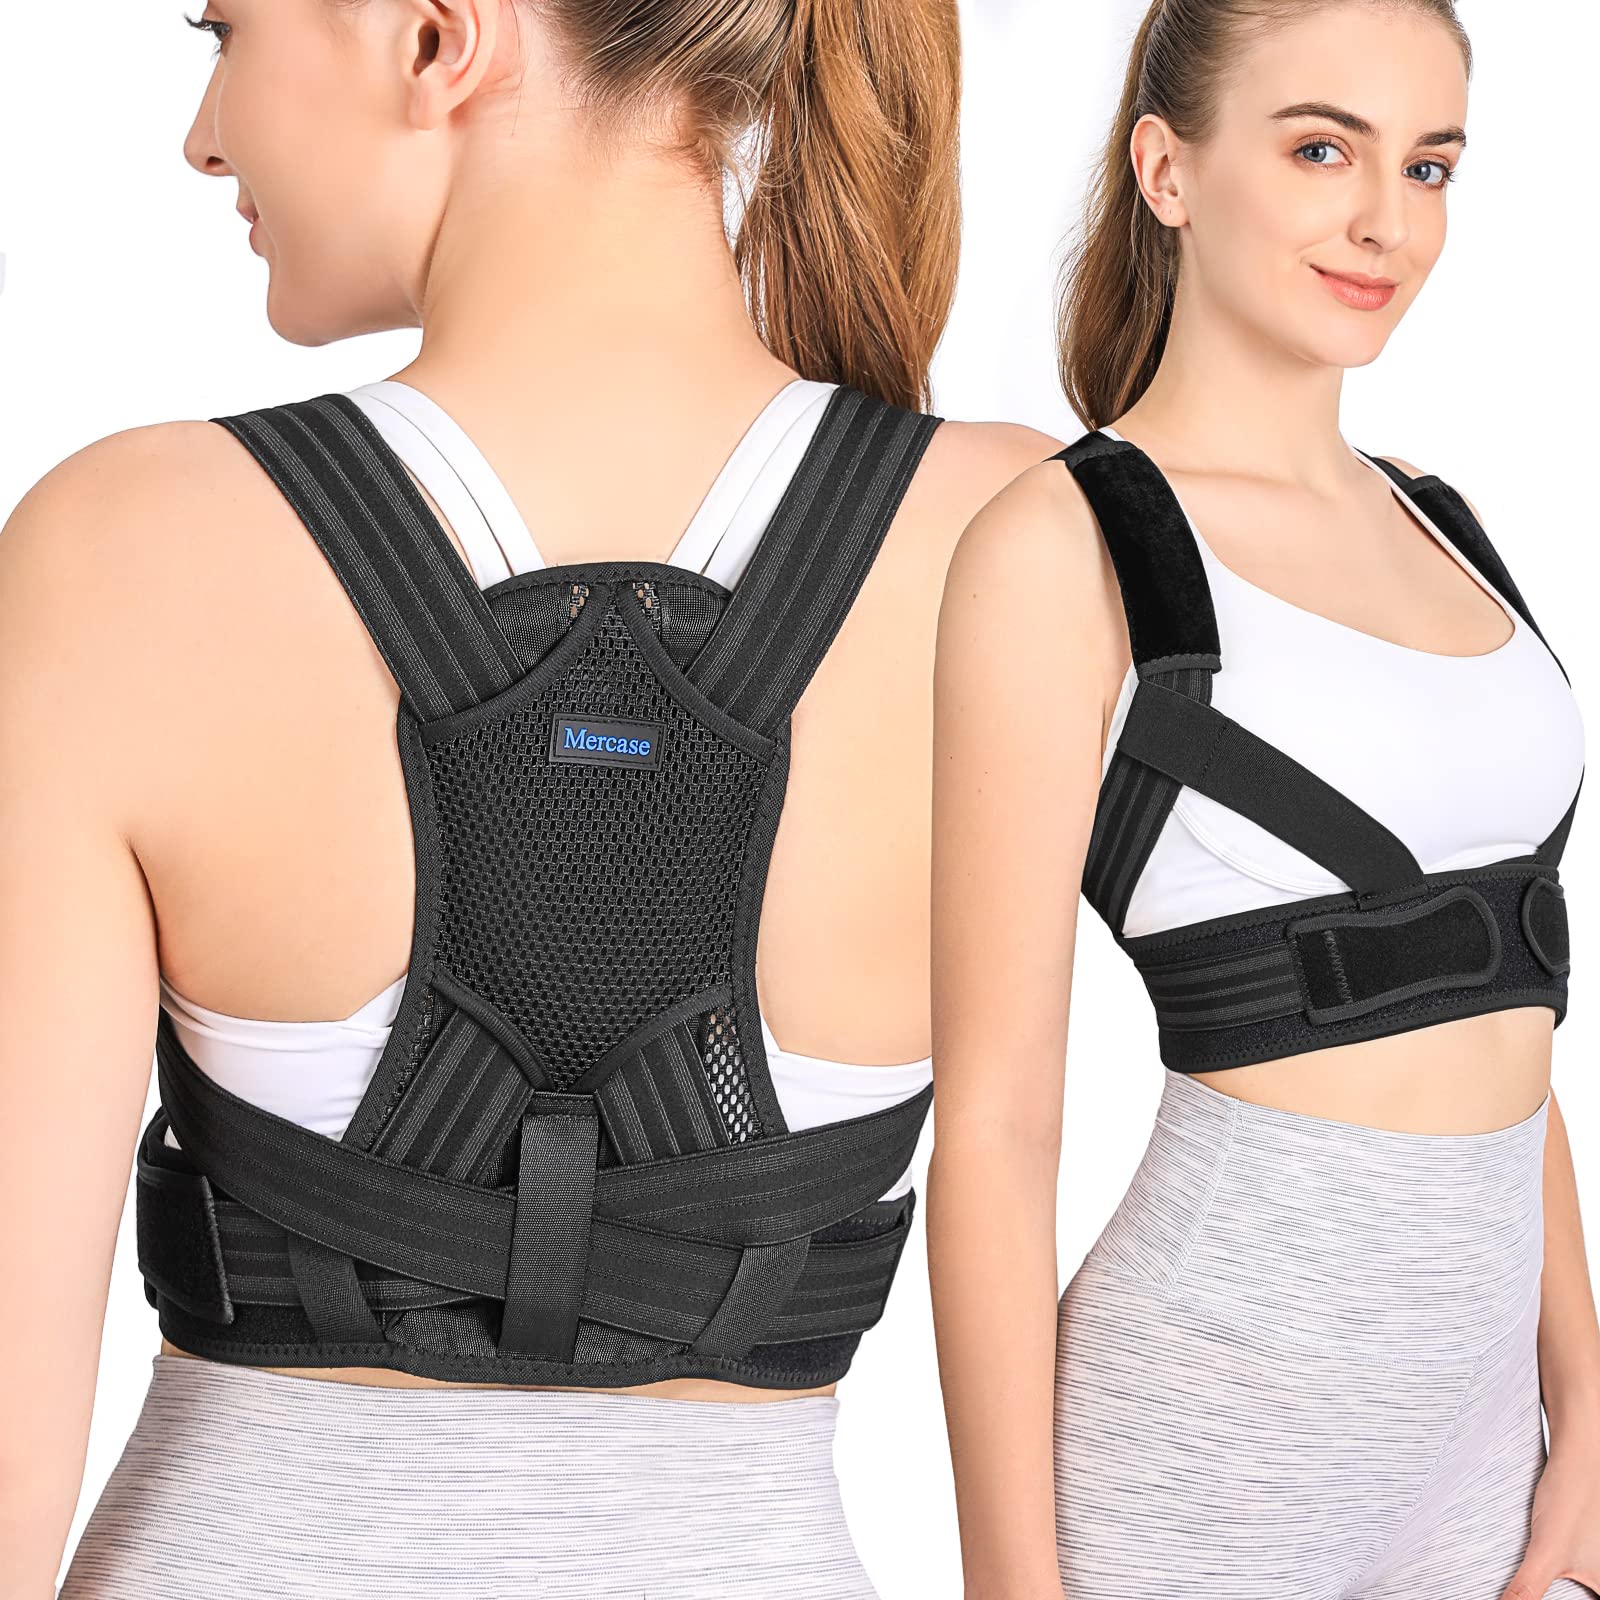  Mercase Back Brace for Lower Back Pain Relief, Lower